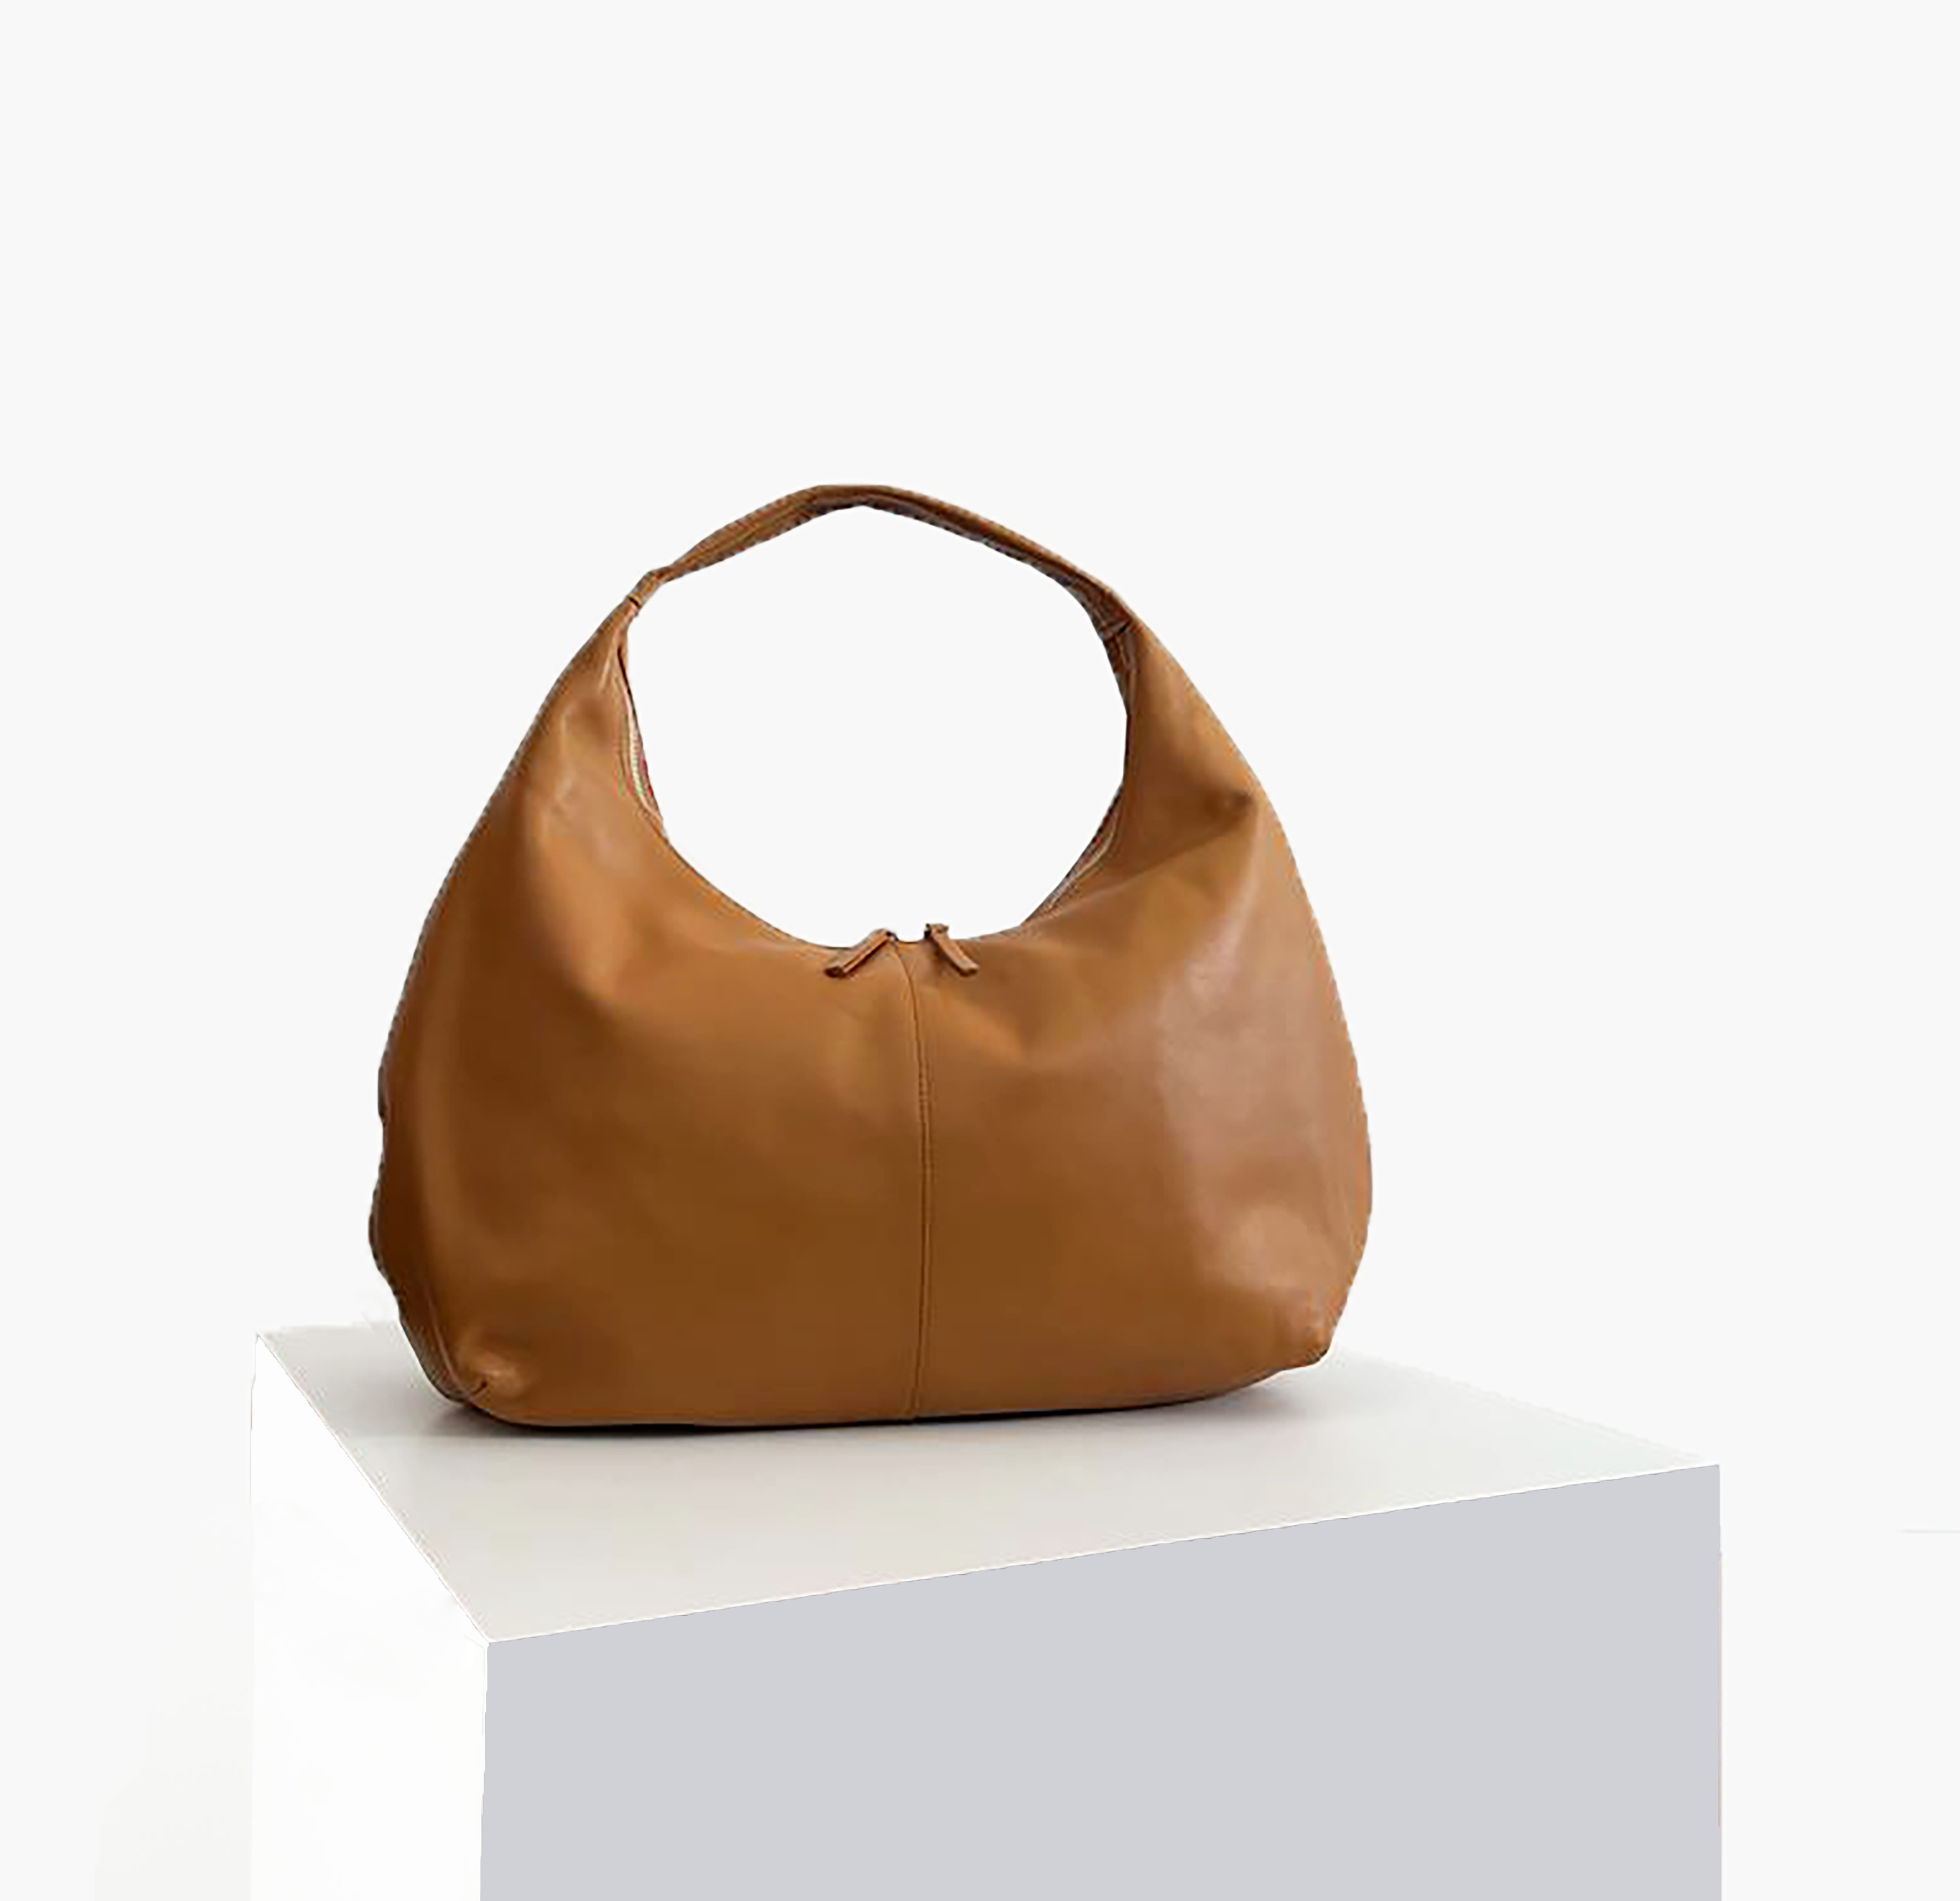 Lunae hobo in tan (sold out)